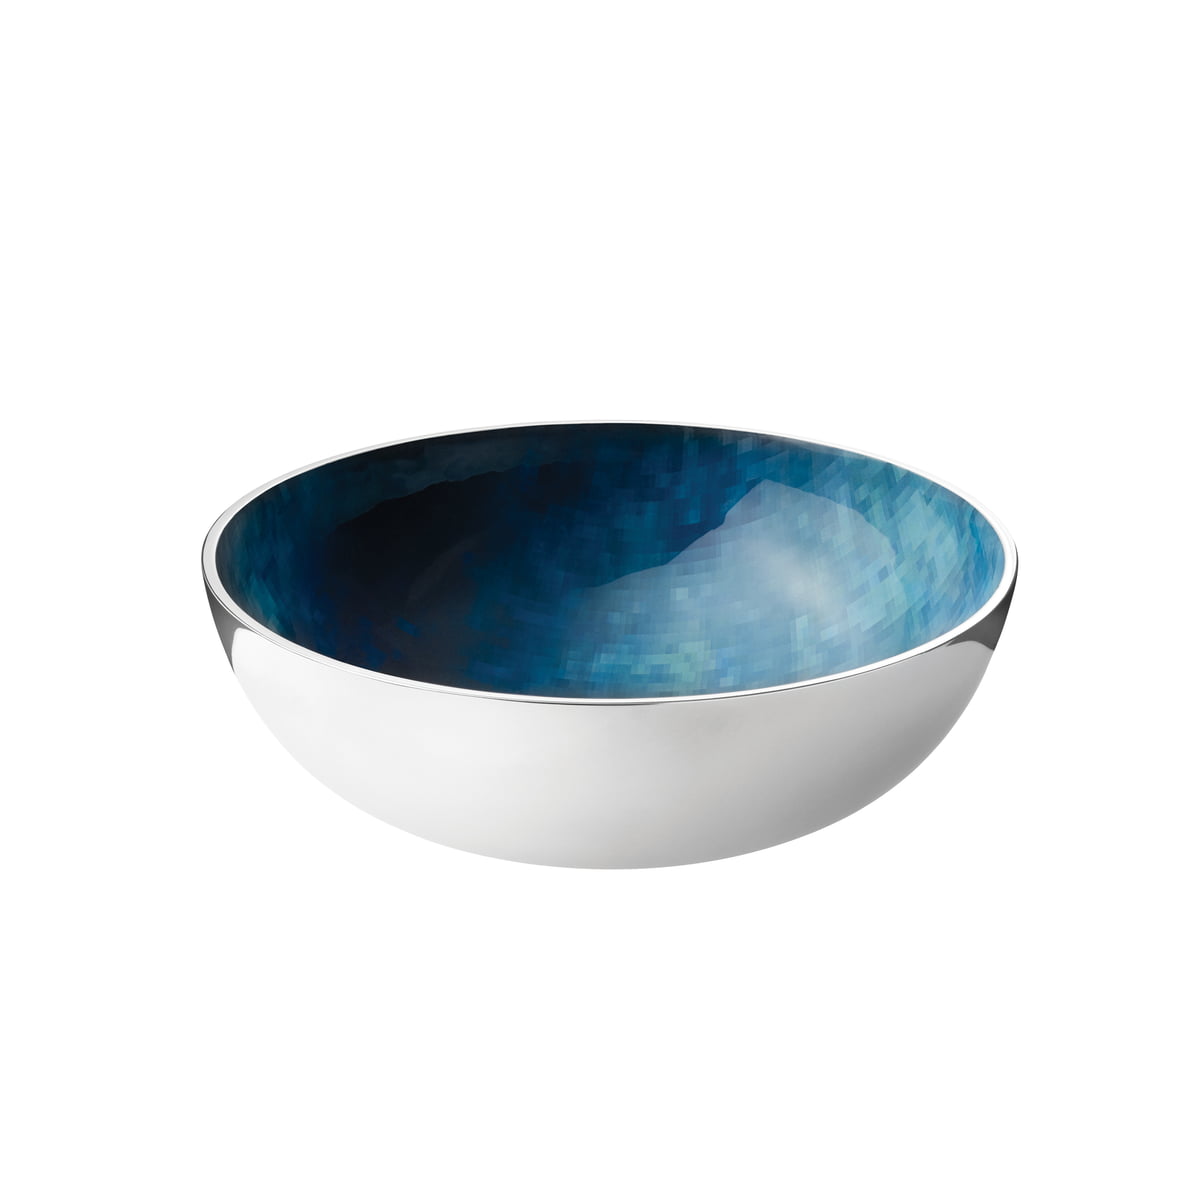 Stockholm Bowl Horizon by Stelton in our shop